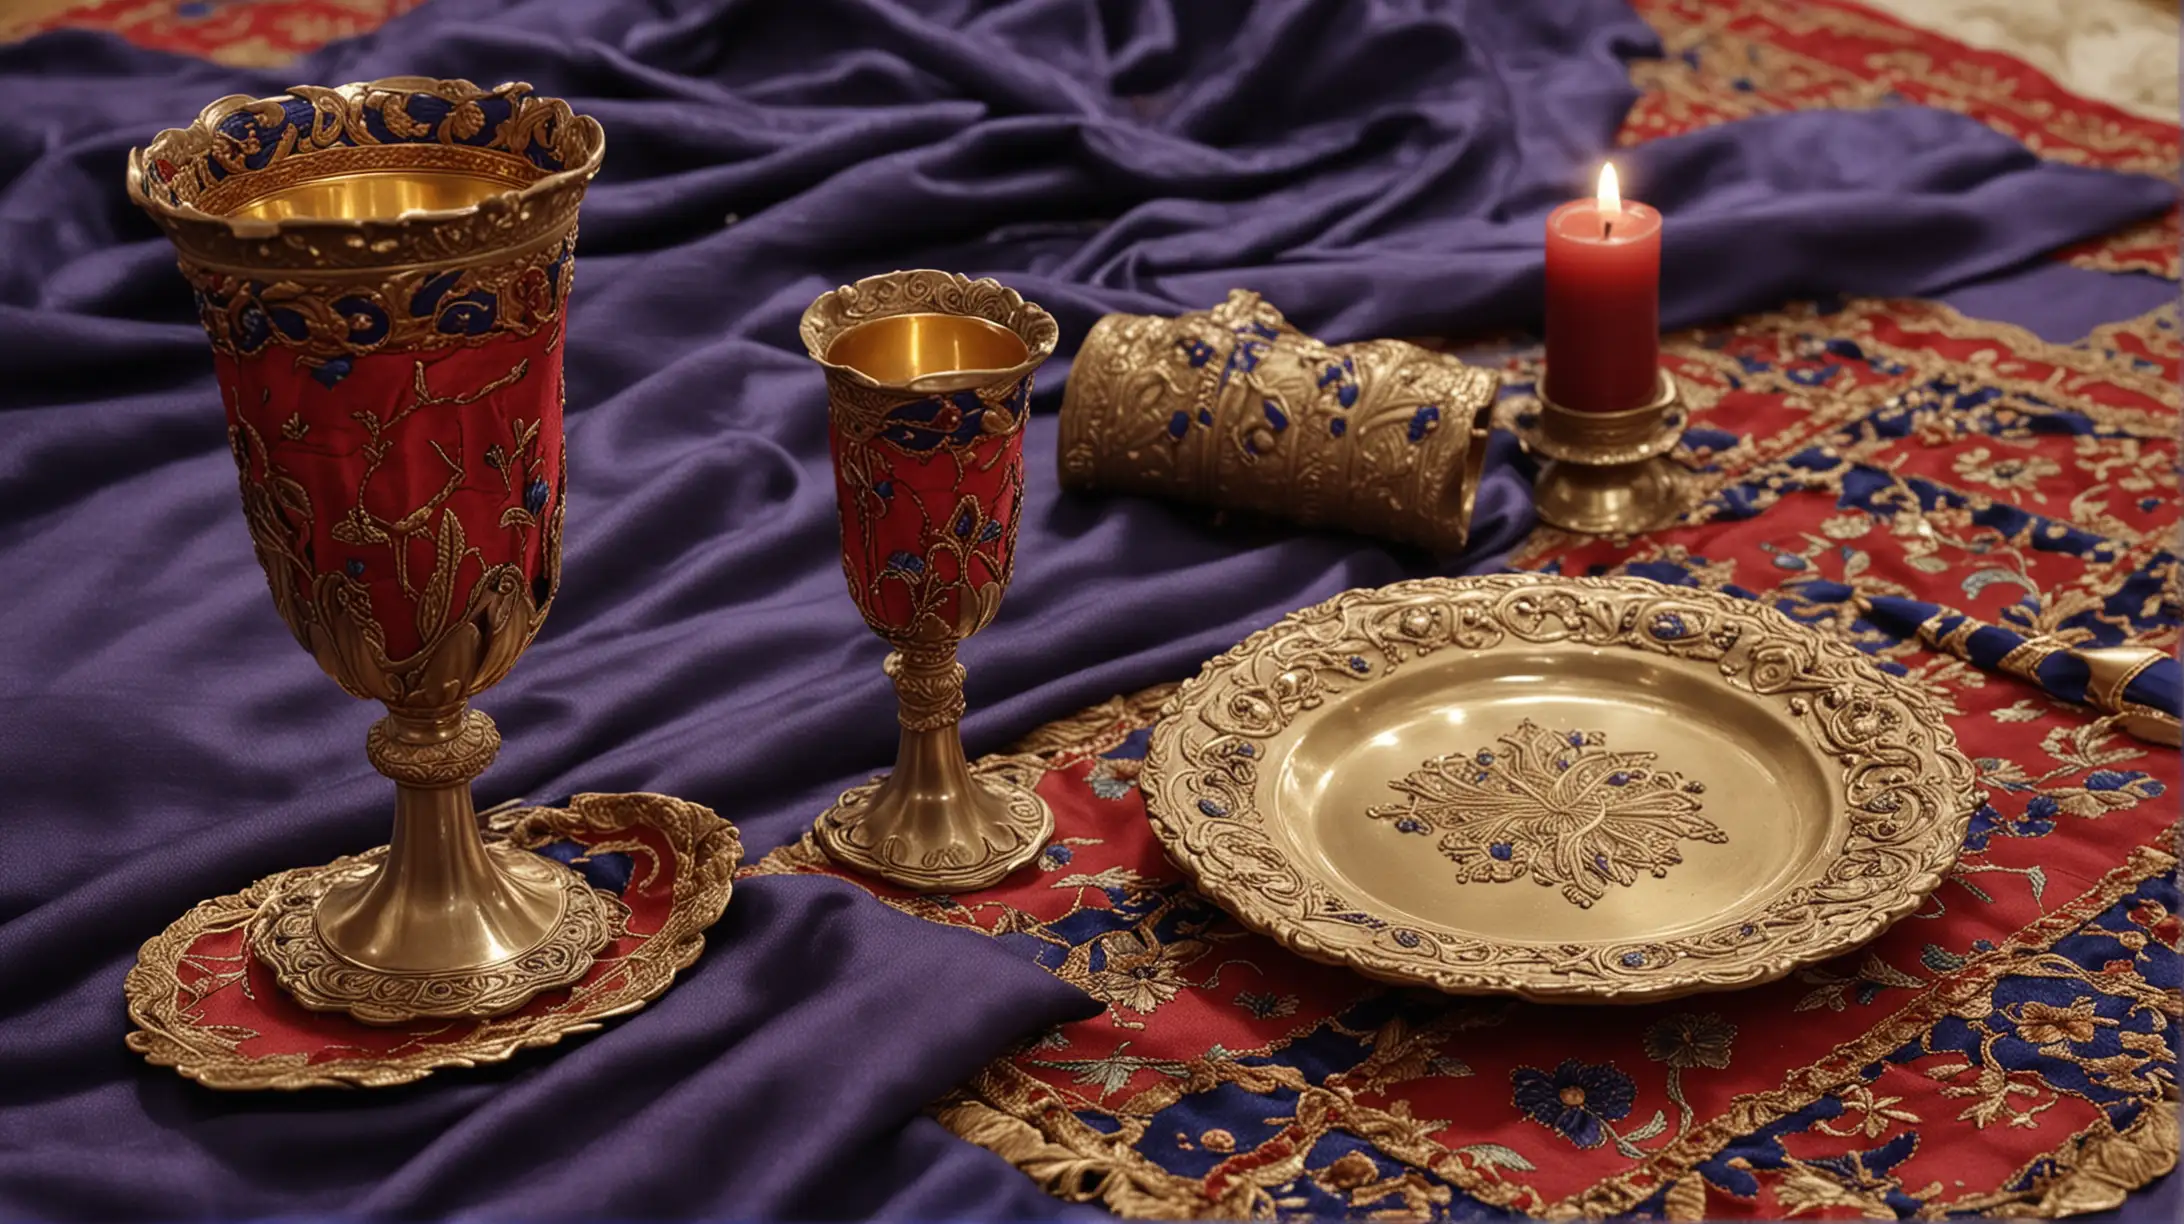 Tabernacle Furnishings Detailed Needlework and Precious Utensils from the Time of Moses